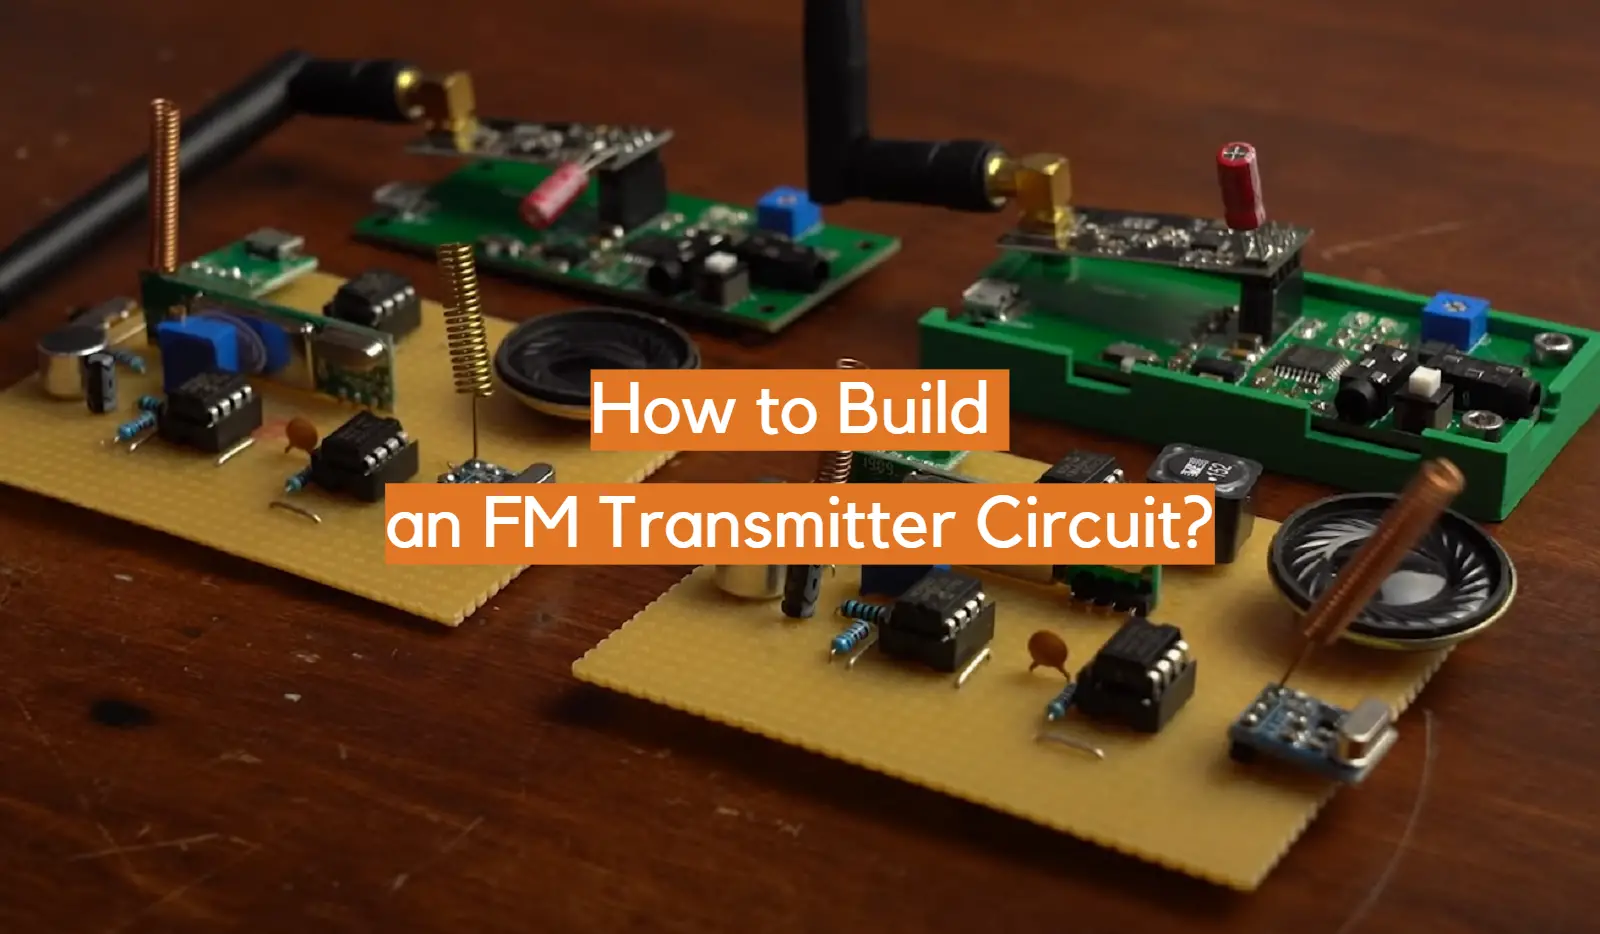 How to Build an FM Transmitter Circuit?